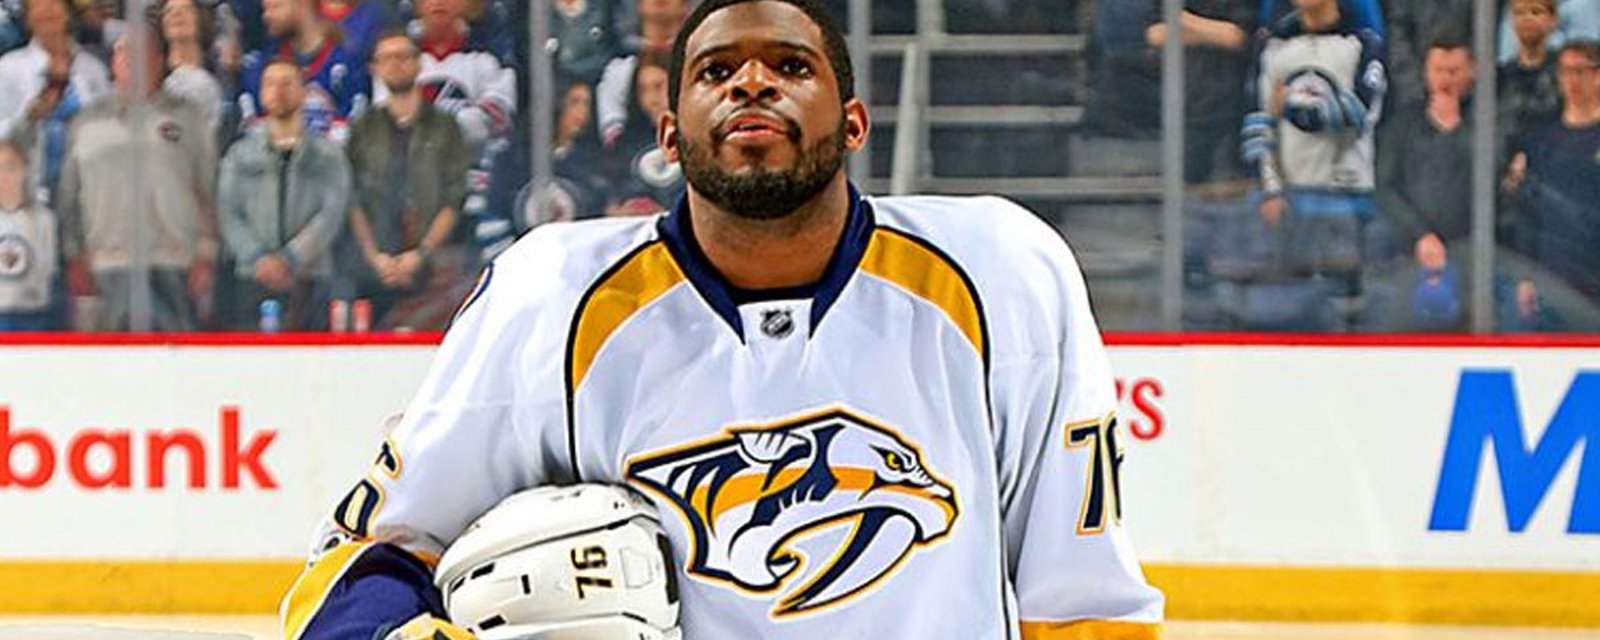 Subban to end up with the Canucks this summer?!